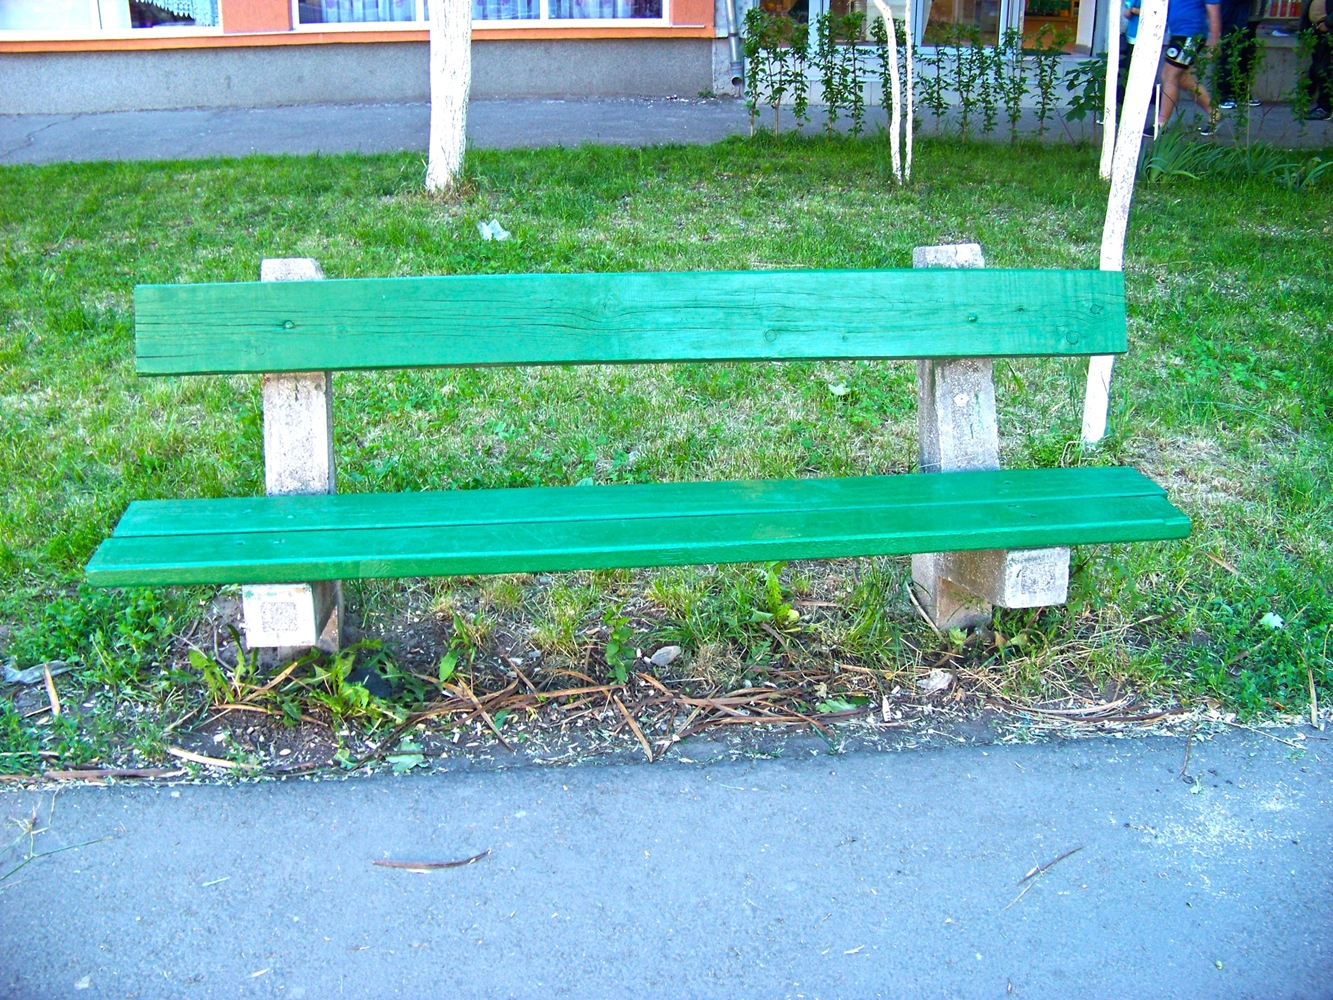 A green bench in a park photo